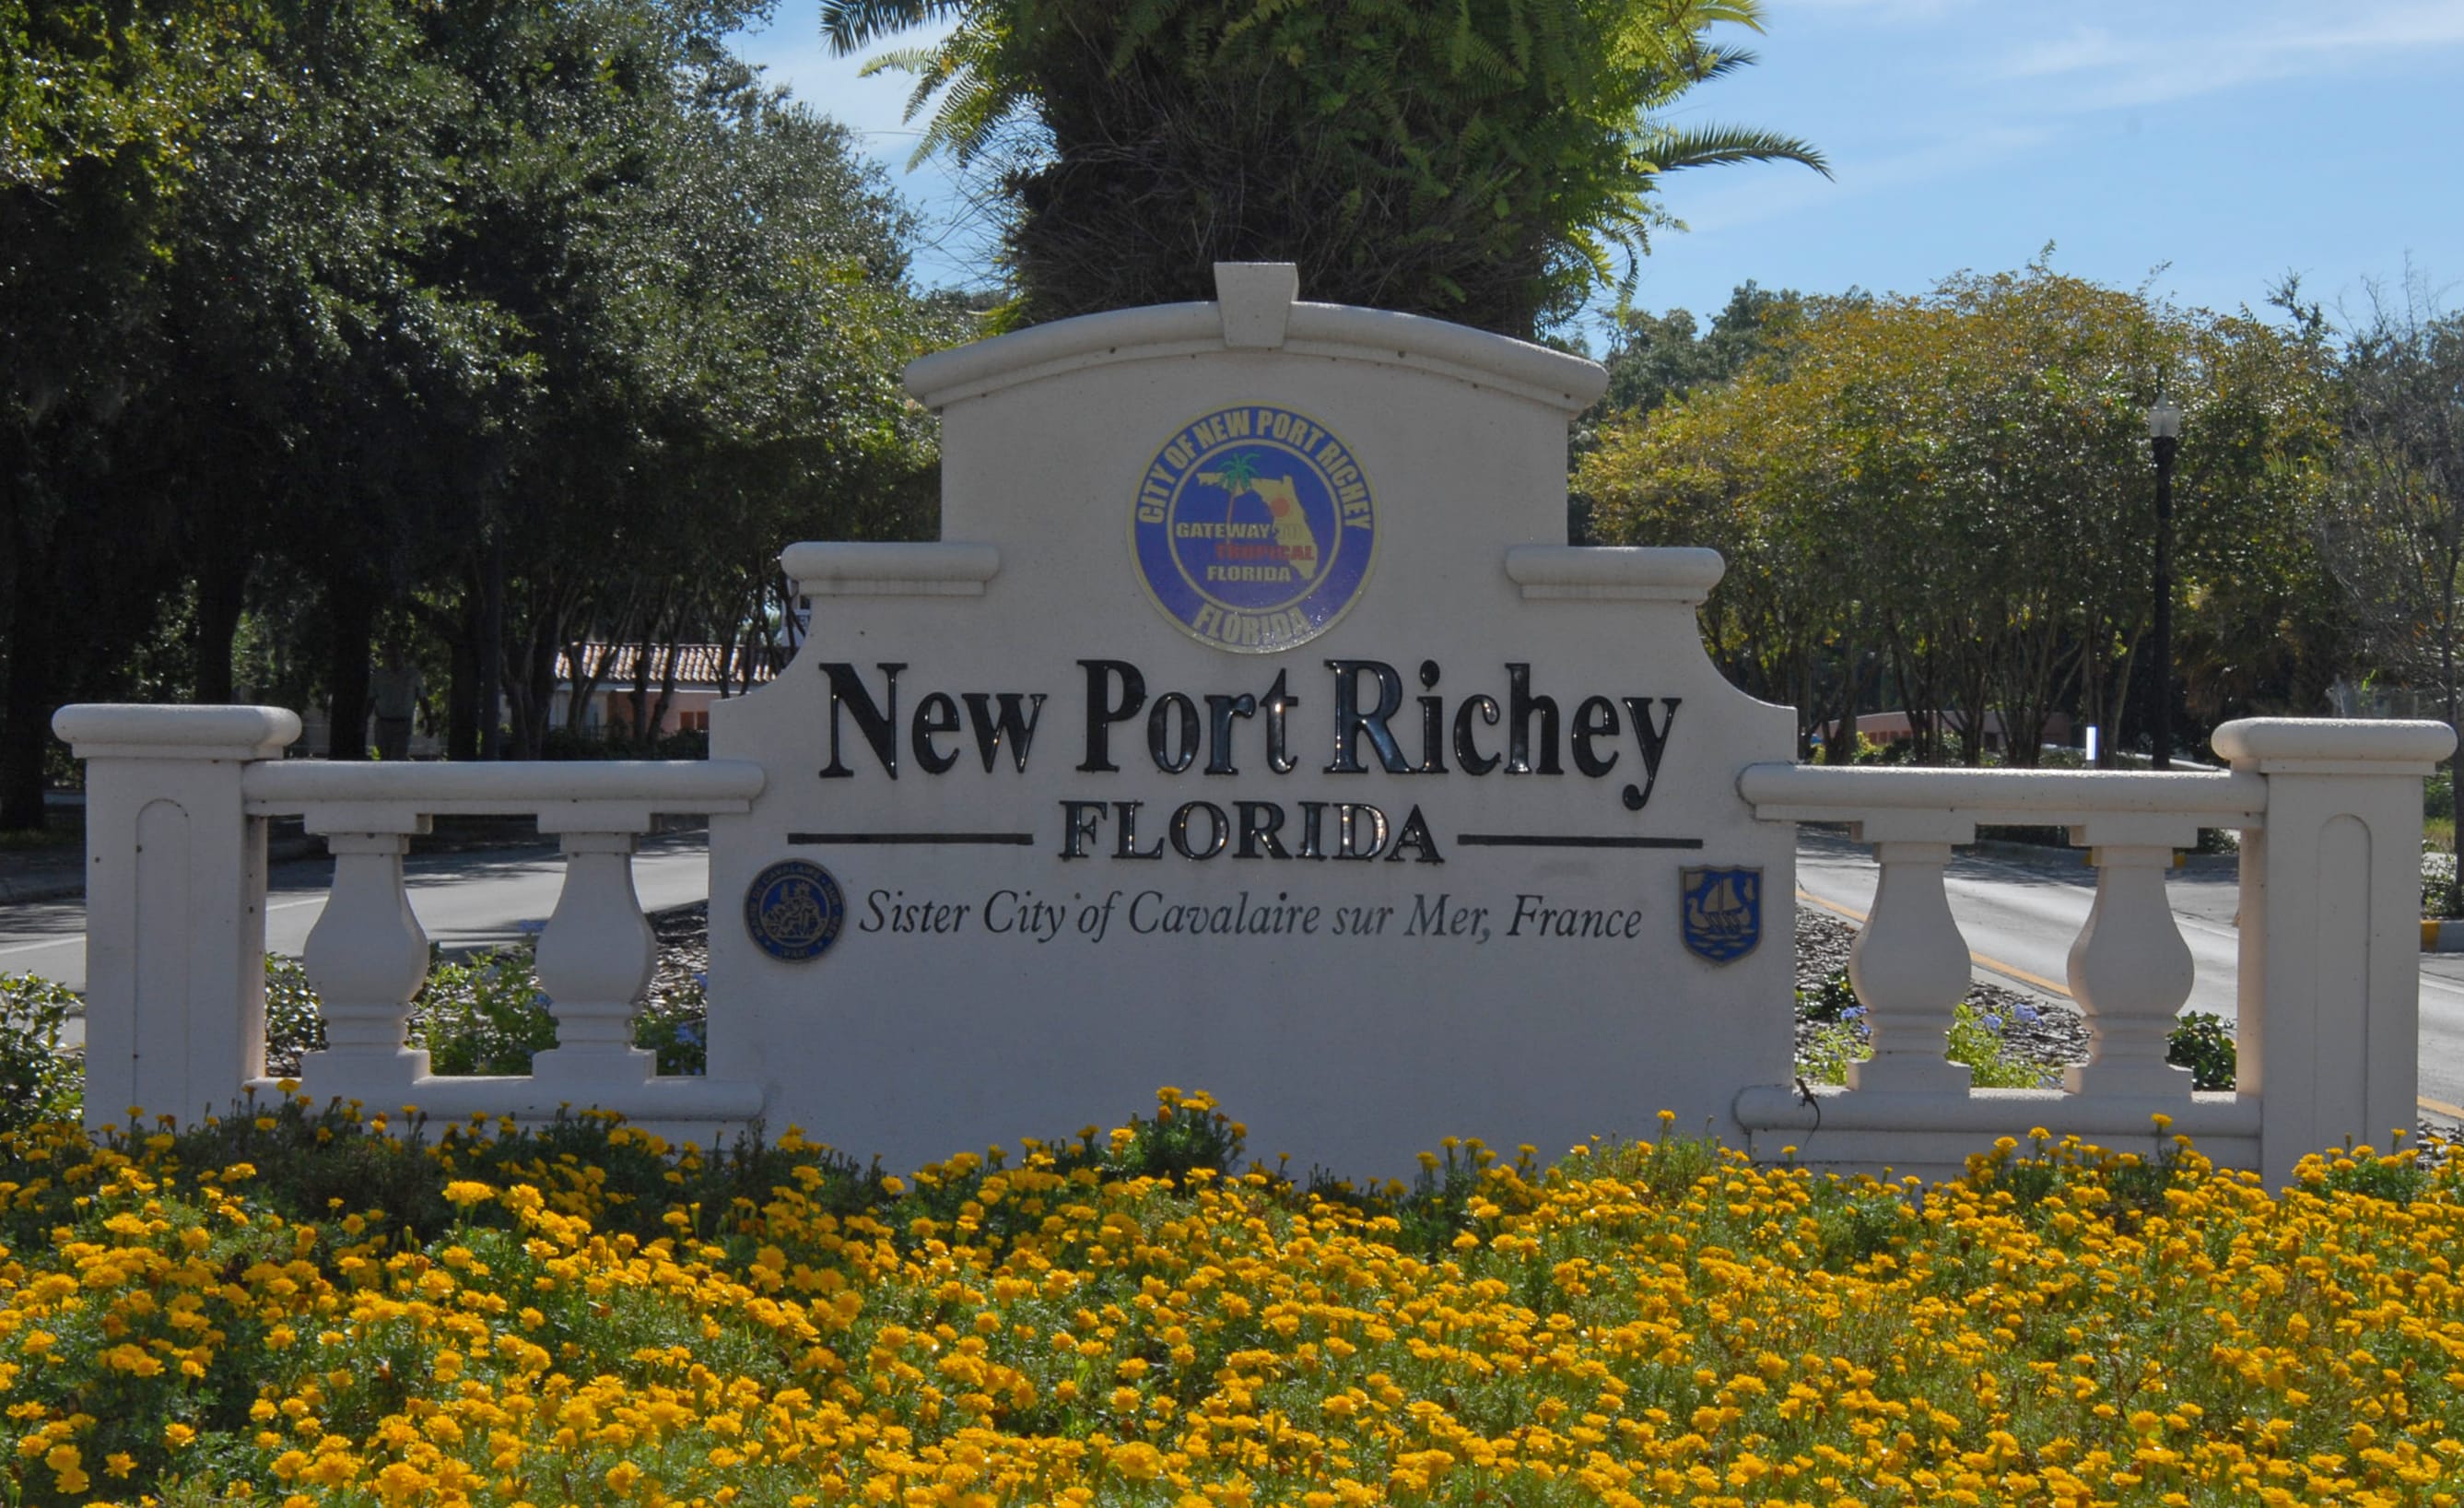 Inverness, New Port Richey Low Cost Cremation | Mortuary Services of Florida